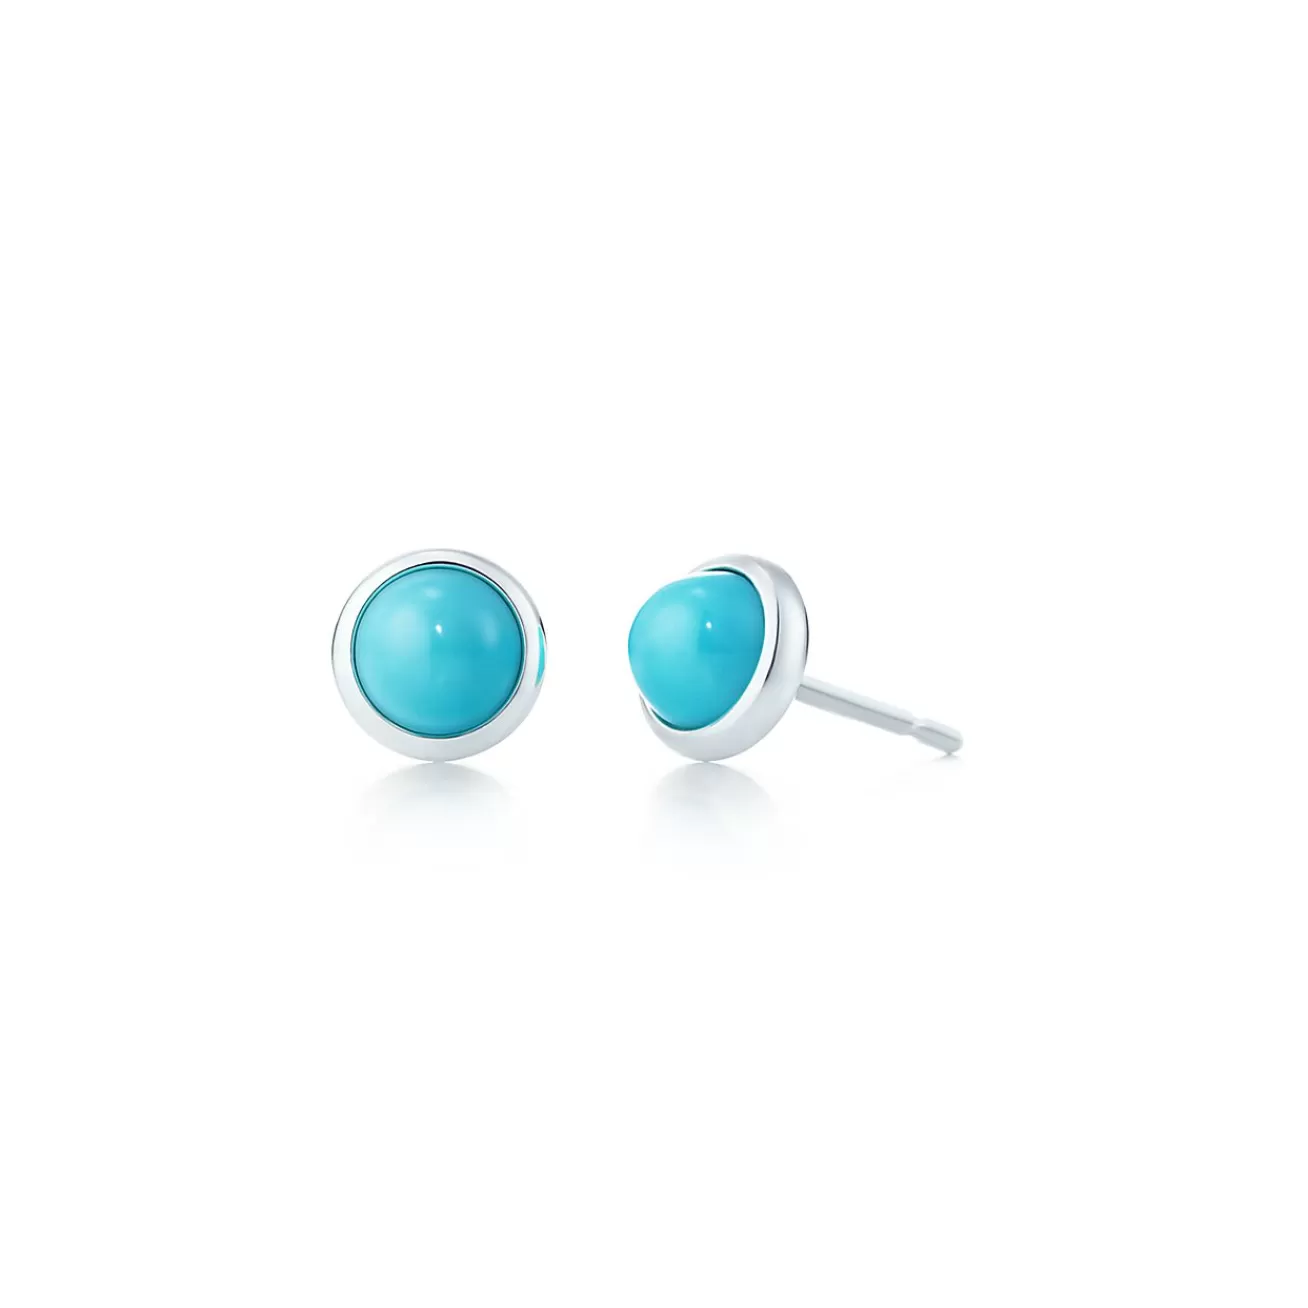 Tiffany & Co. Elsa Peretti® Color by the Yard earrings in silver with turquoise. | ^ Earrings | Sterling Silver Jewelry